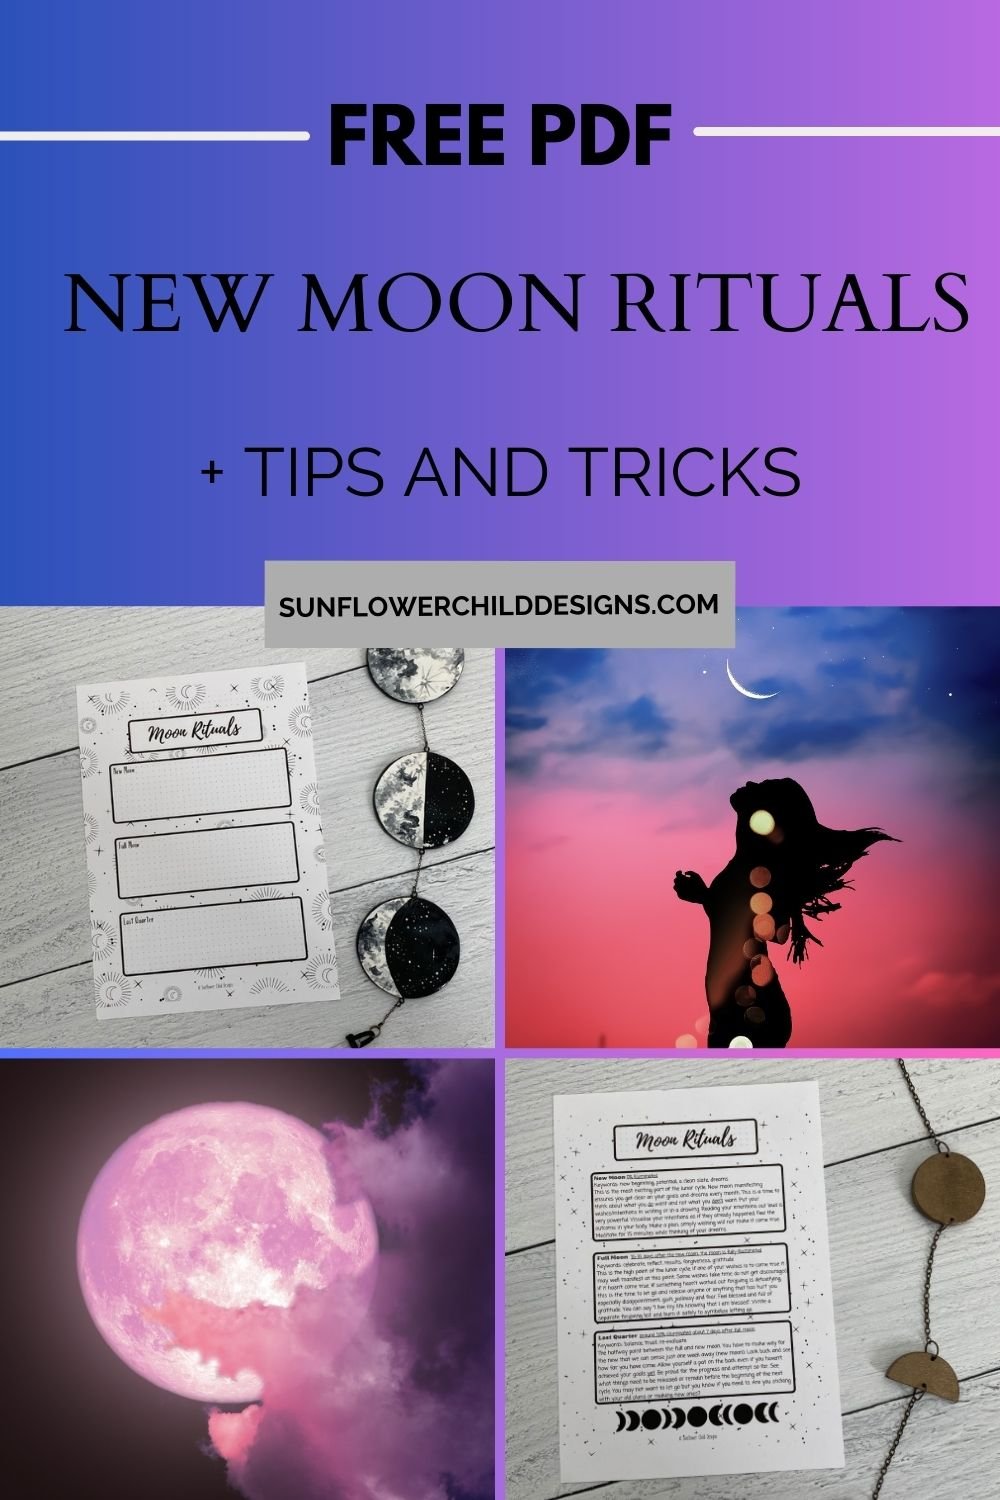 Manifest Your Dreams with New Moon Rituals